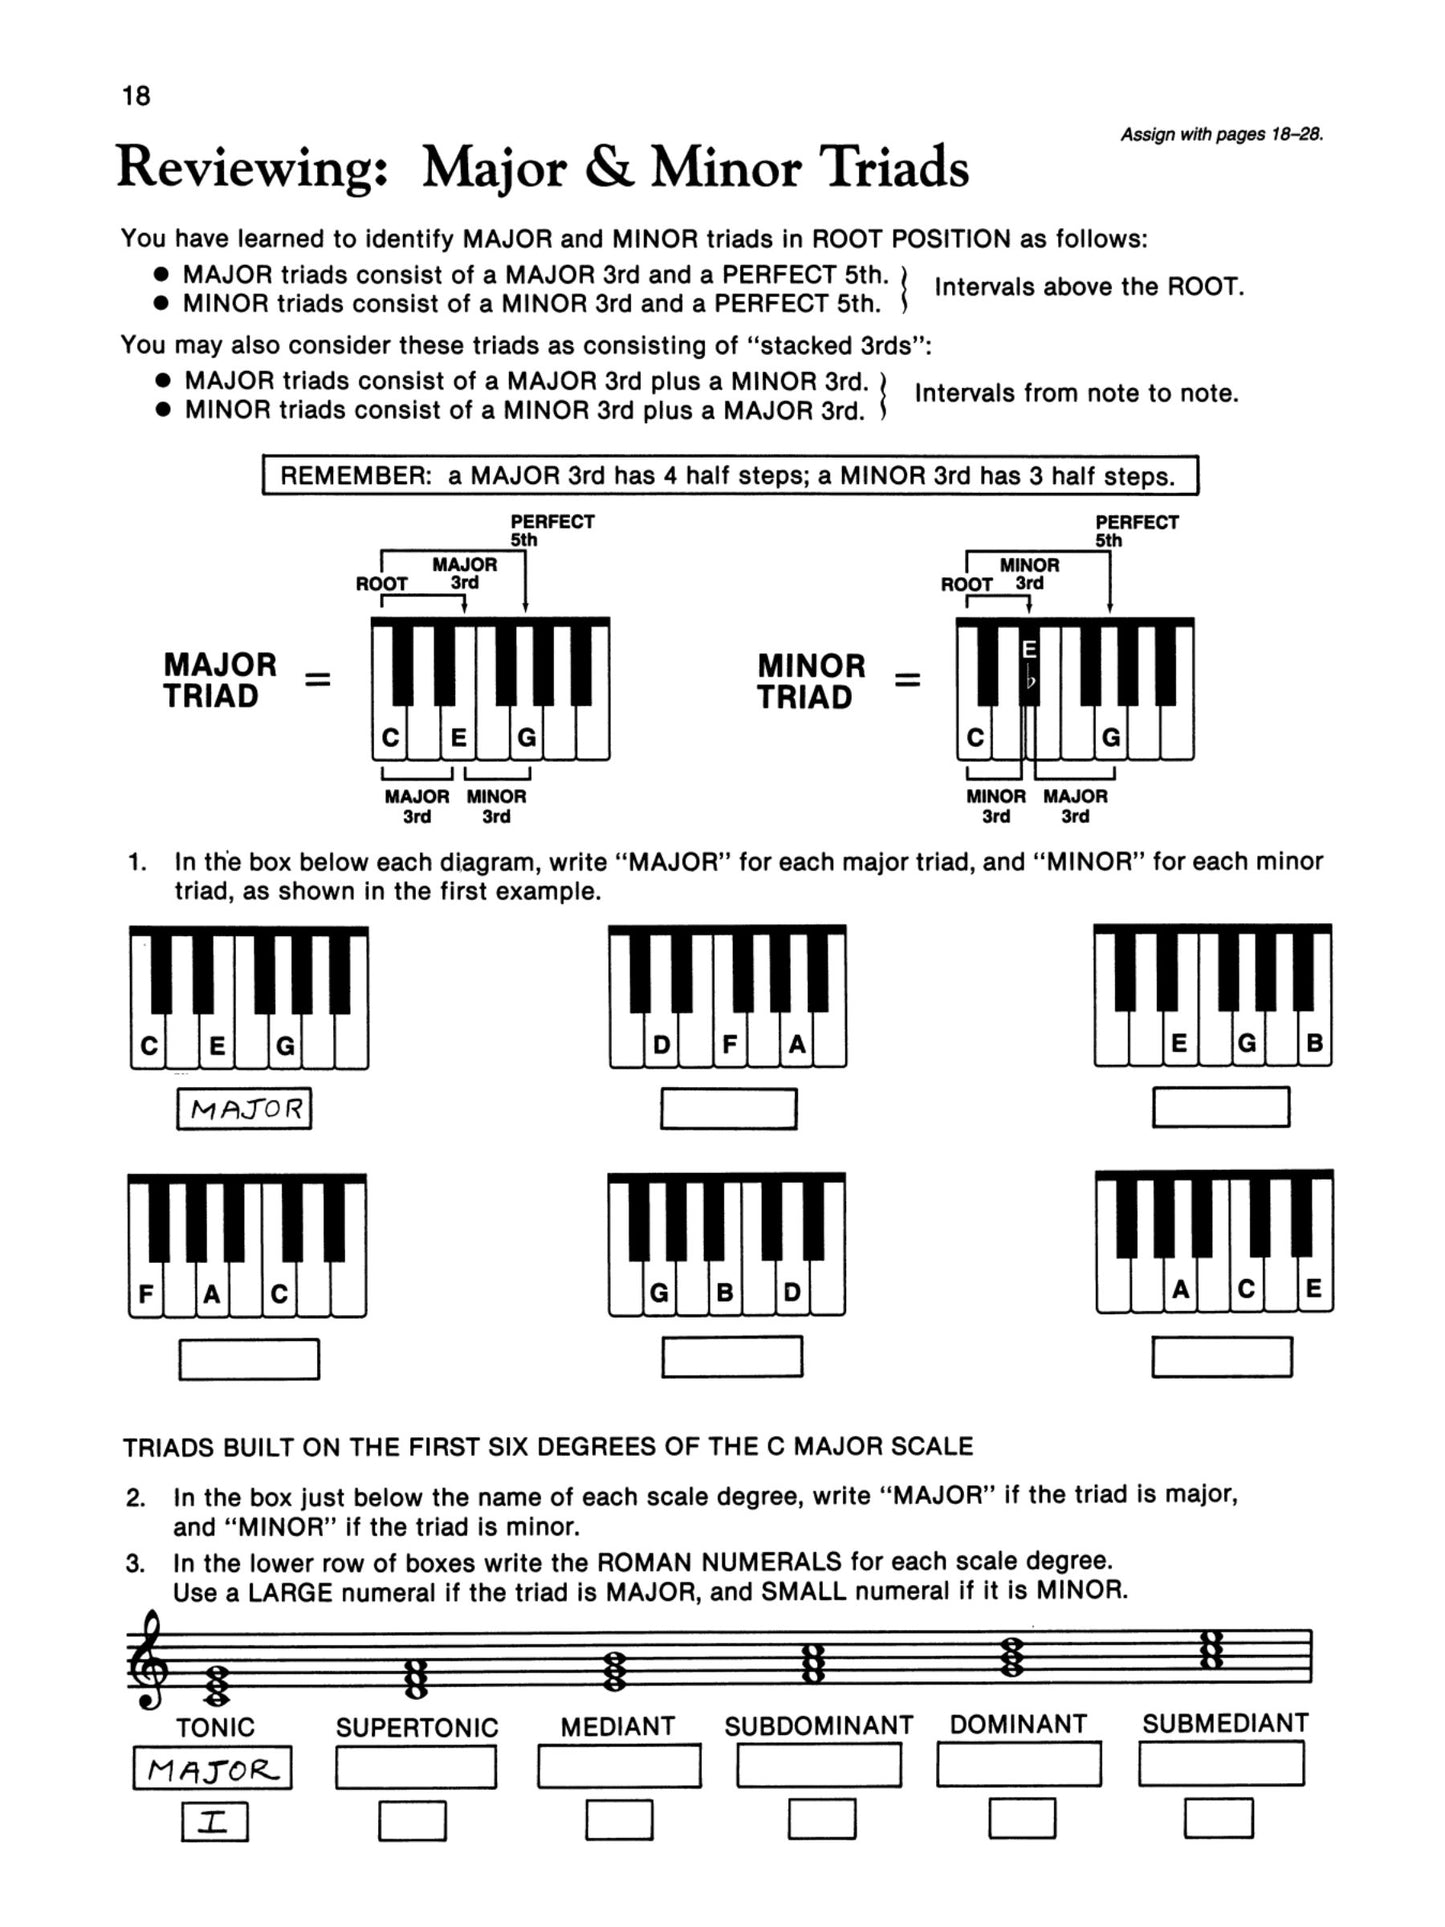 Alfred's Basic Adult Piano Course - Theory Book 3